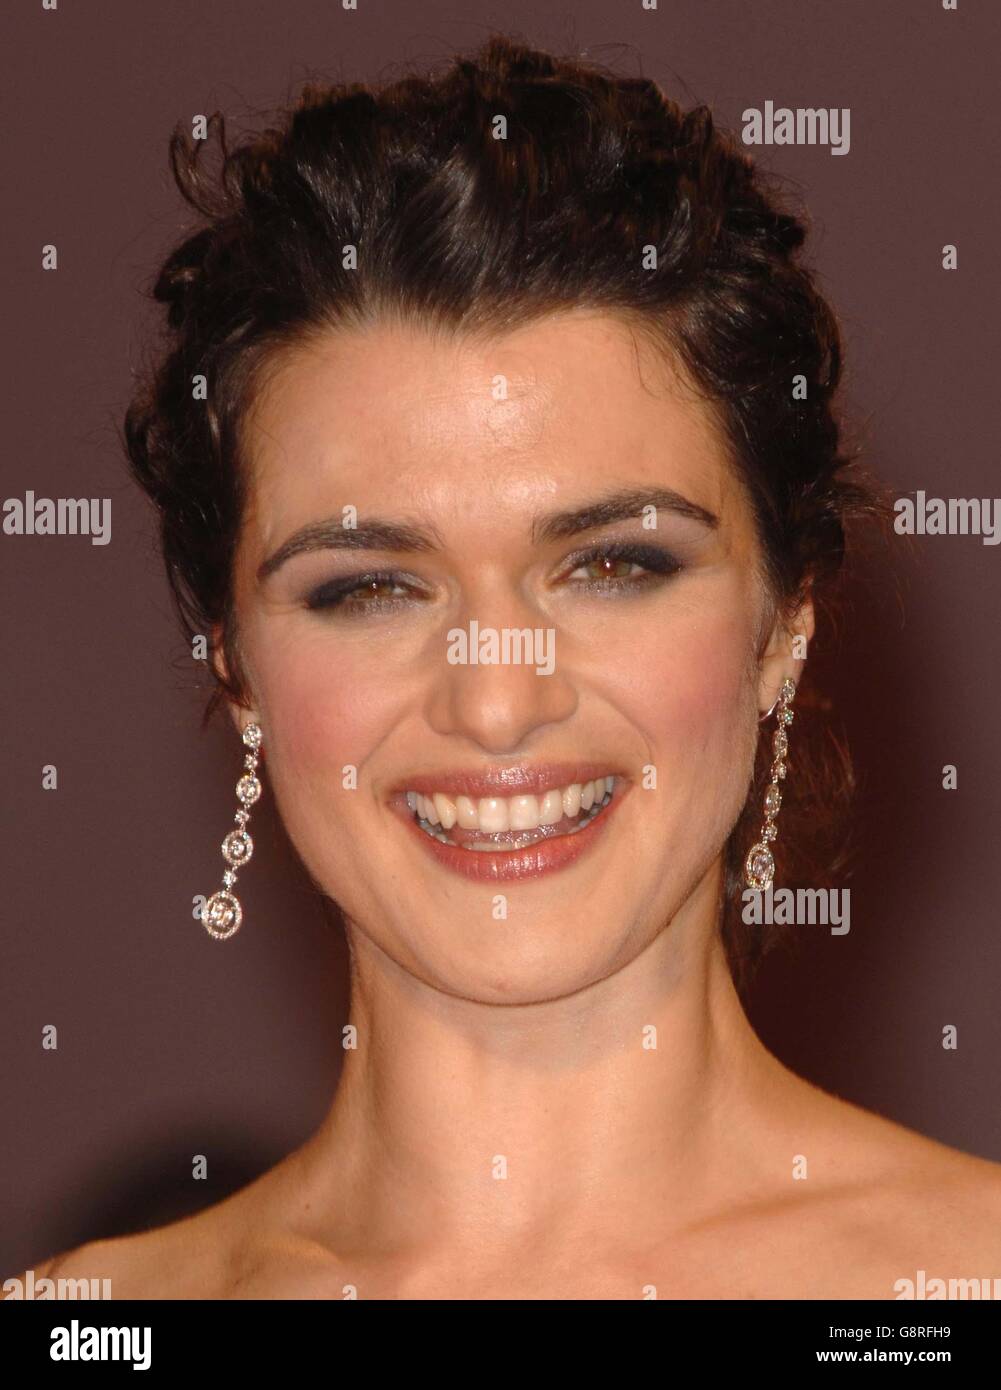 Rachel Weisz attends the premiere of her new film The Constant Gardener at the Venice Film Festival. Stock Photo